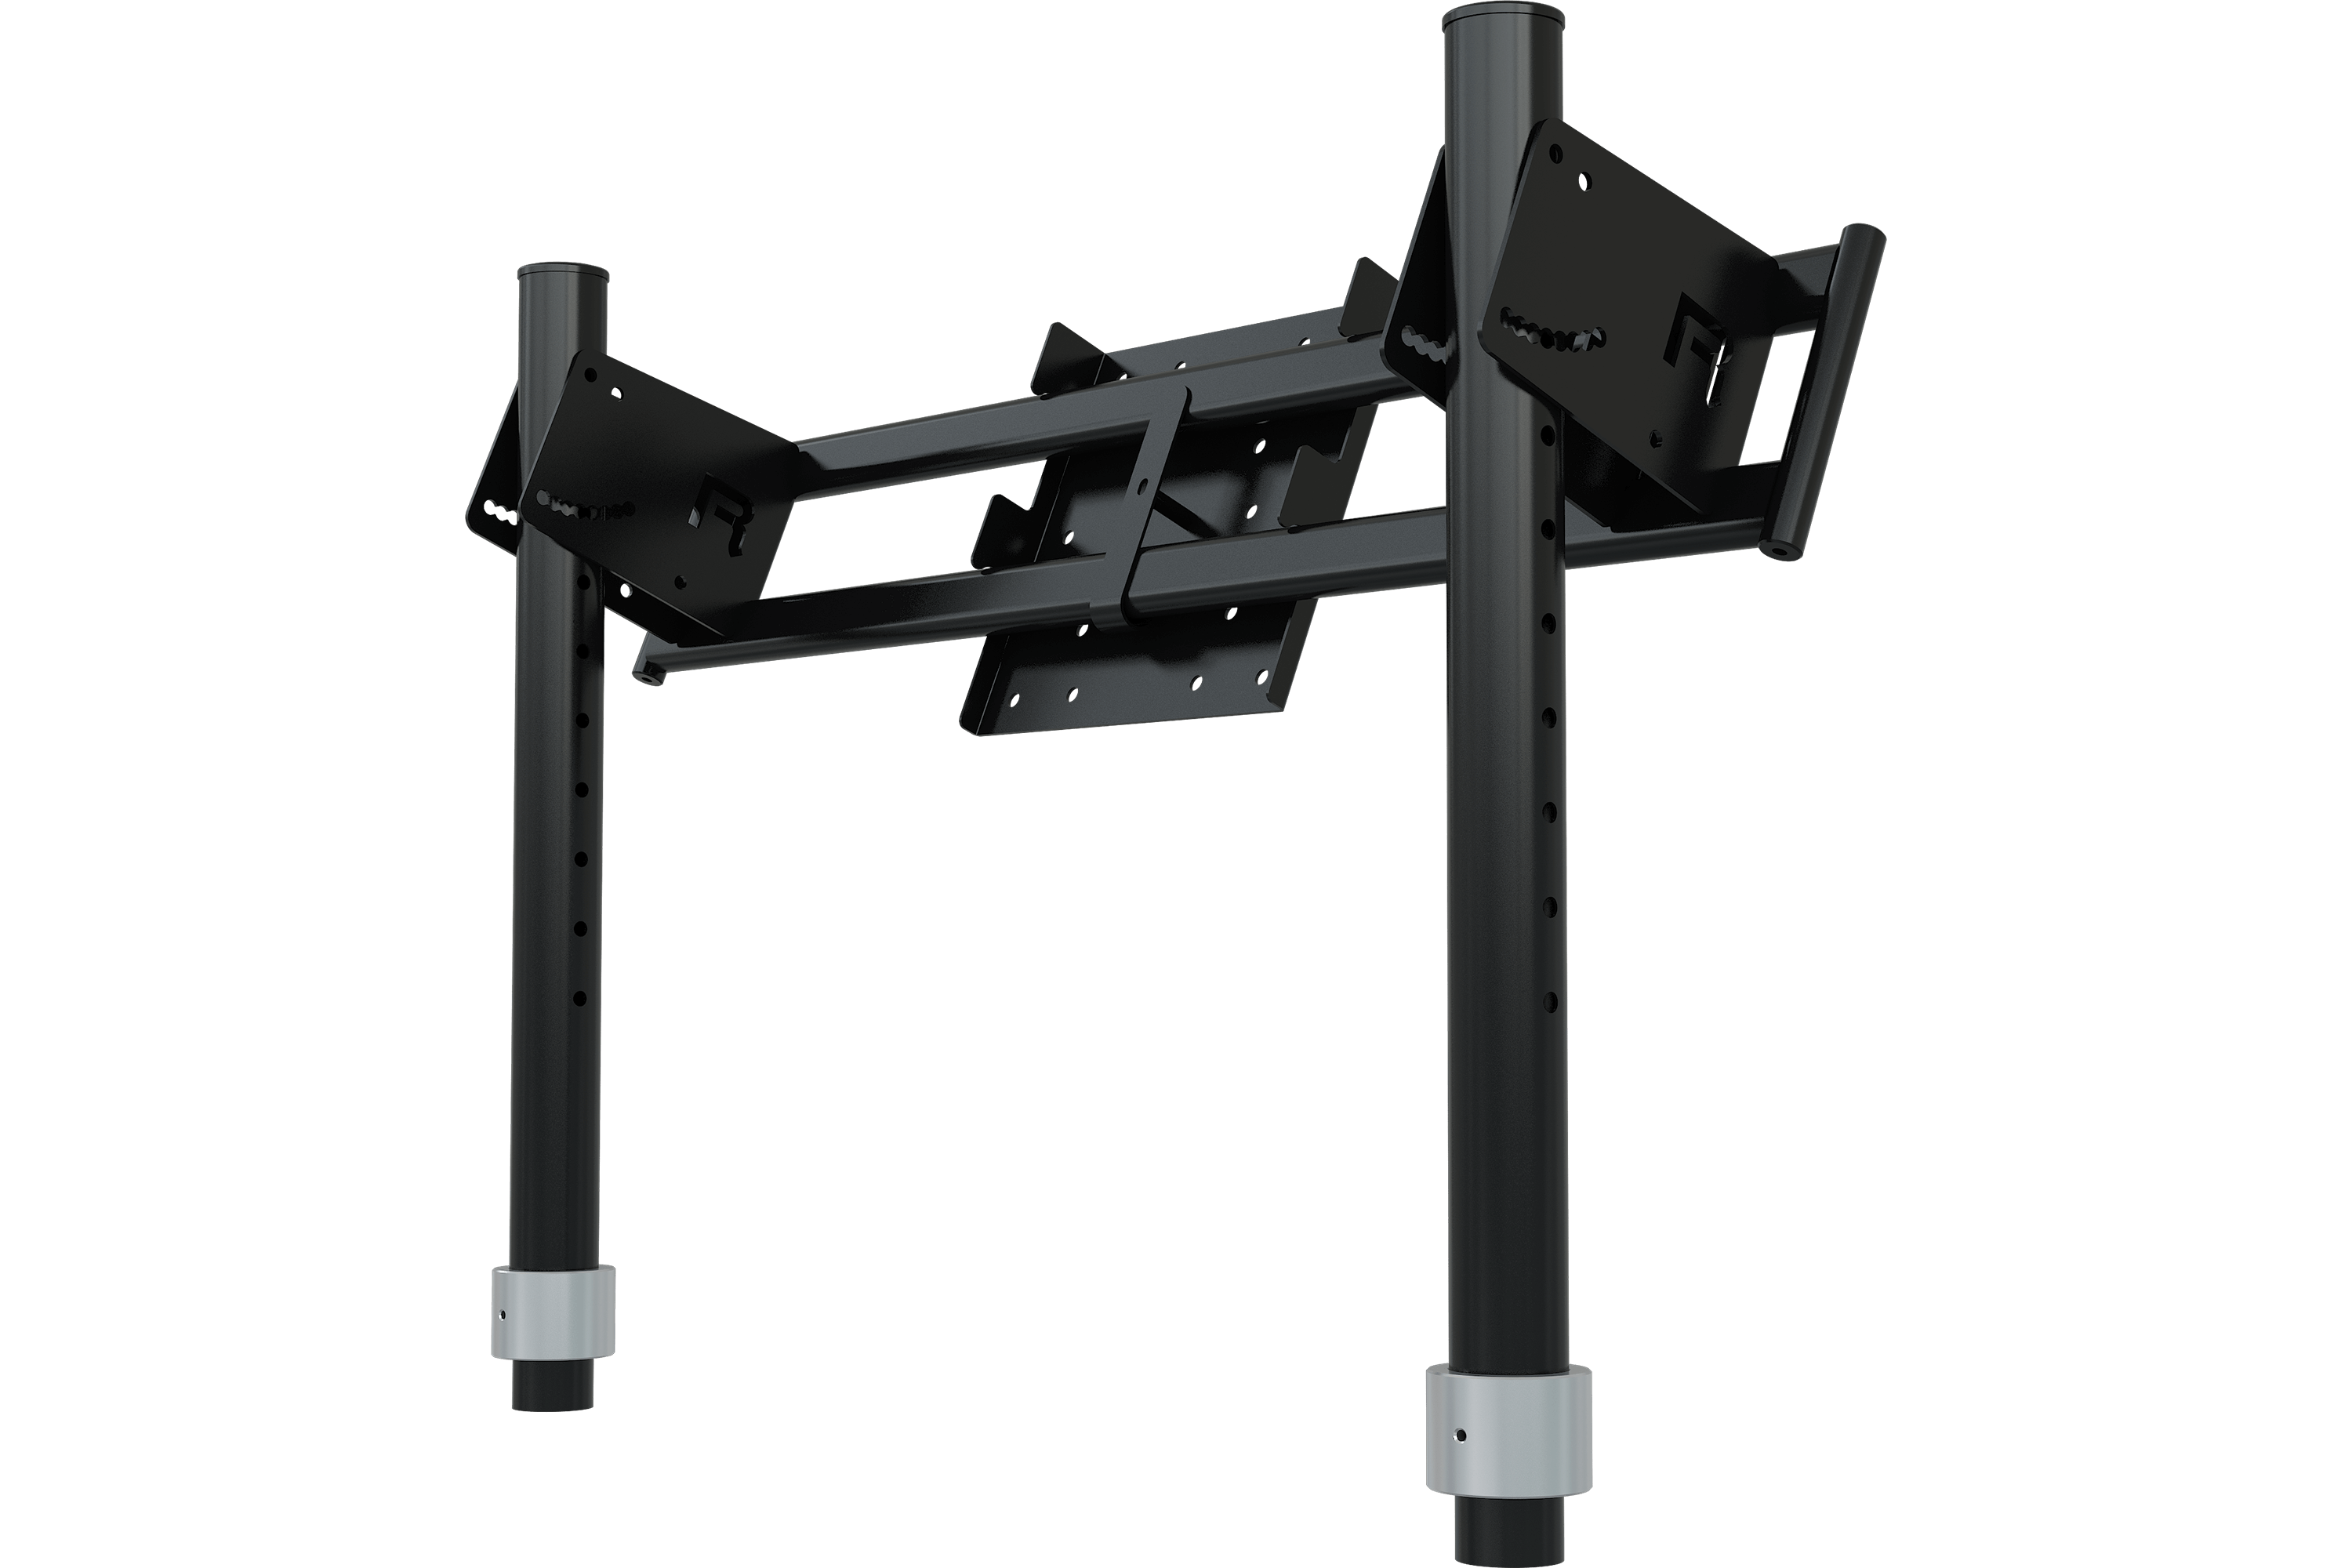 4th/Top Monitor Holder - Holds 16-70" Displays